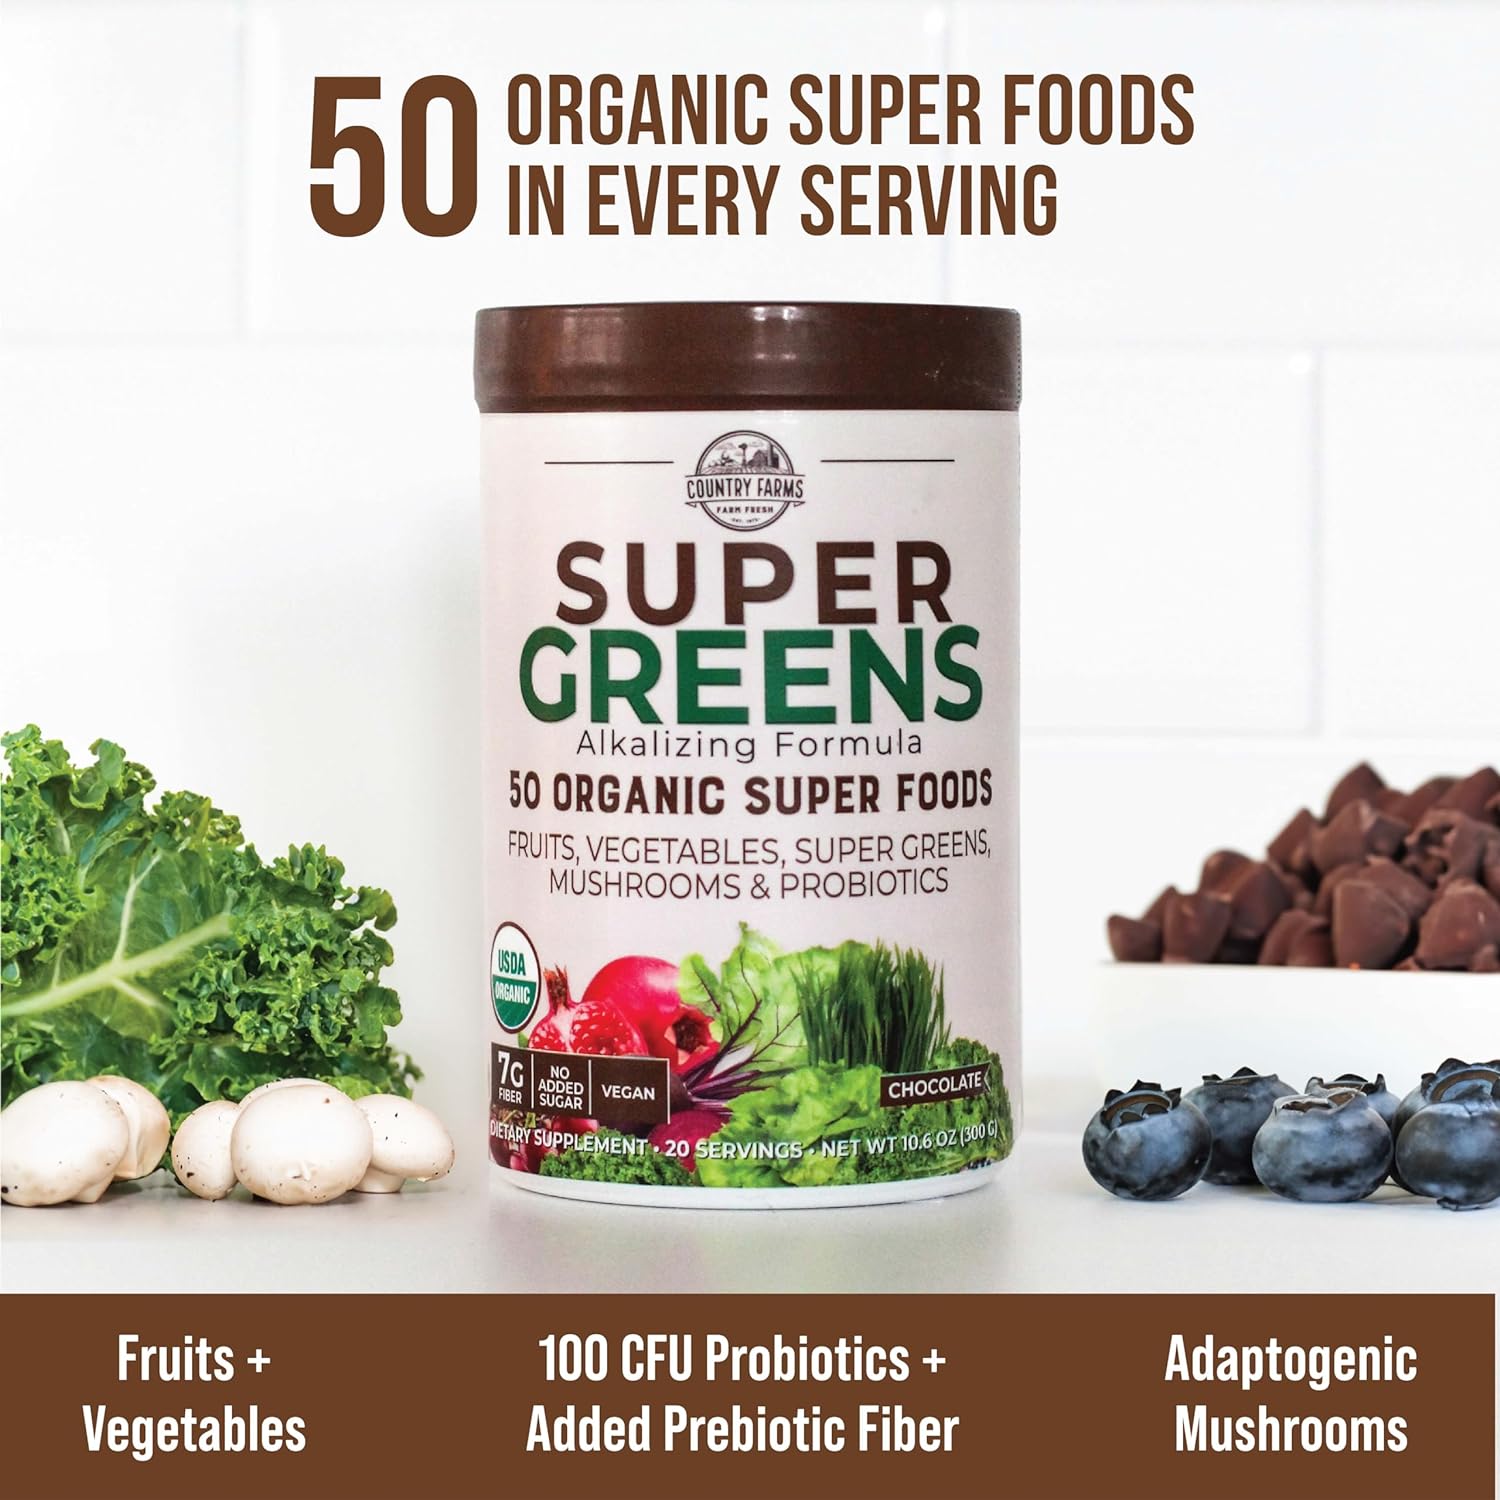 COUNTRY FARMS Super Greens Chocolate Flavor, 50 Organic Super Foods, USDA Organic Drink Mix, Fruits, Vegetables, Super Greens, Mushrooms & Probiotics, Supports Energy, 40 Servings, 10.6 Oz, 2 Pack : Everything Else